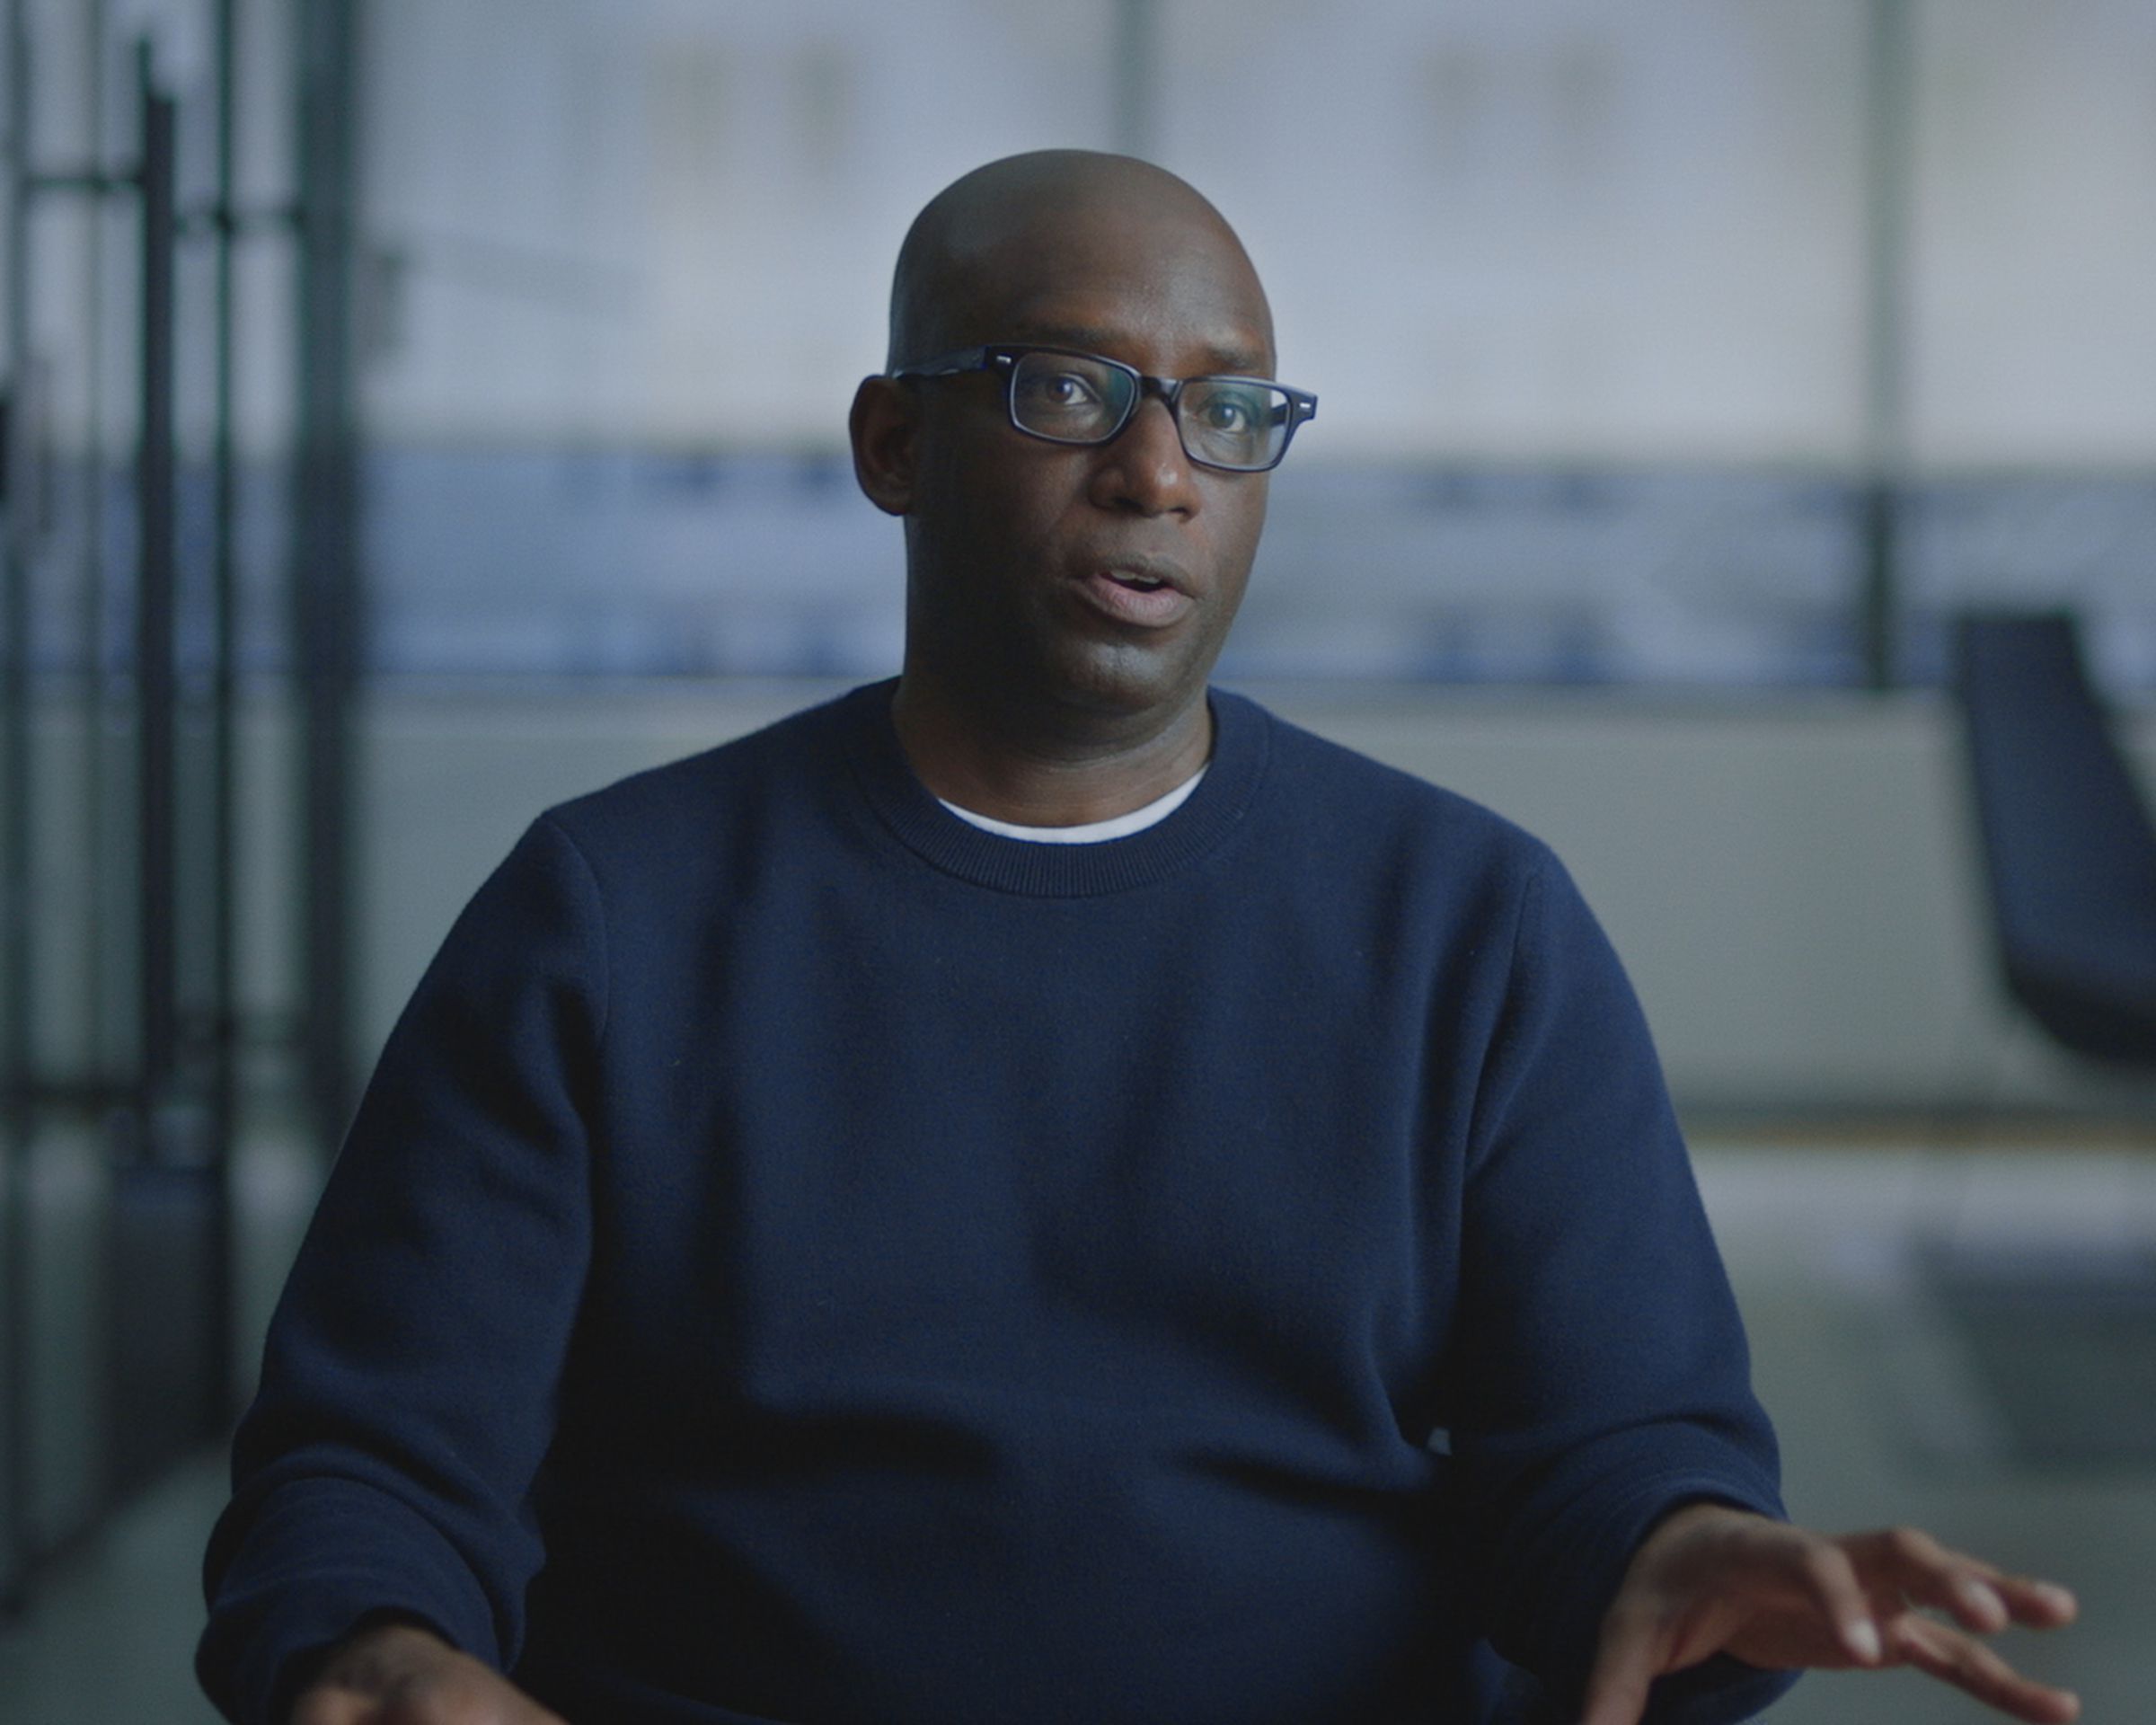 A bald man wearing glasses and a blue sweater in a boardroom.